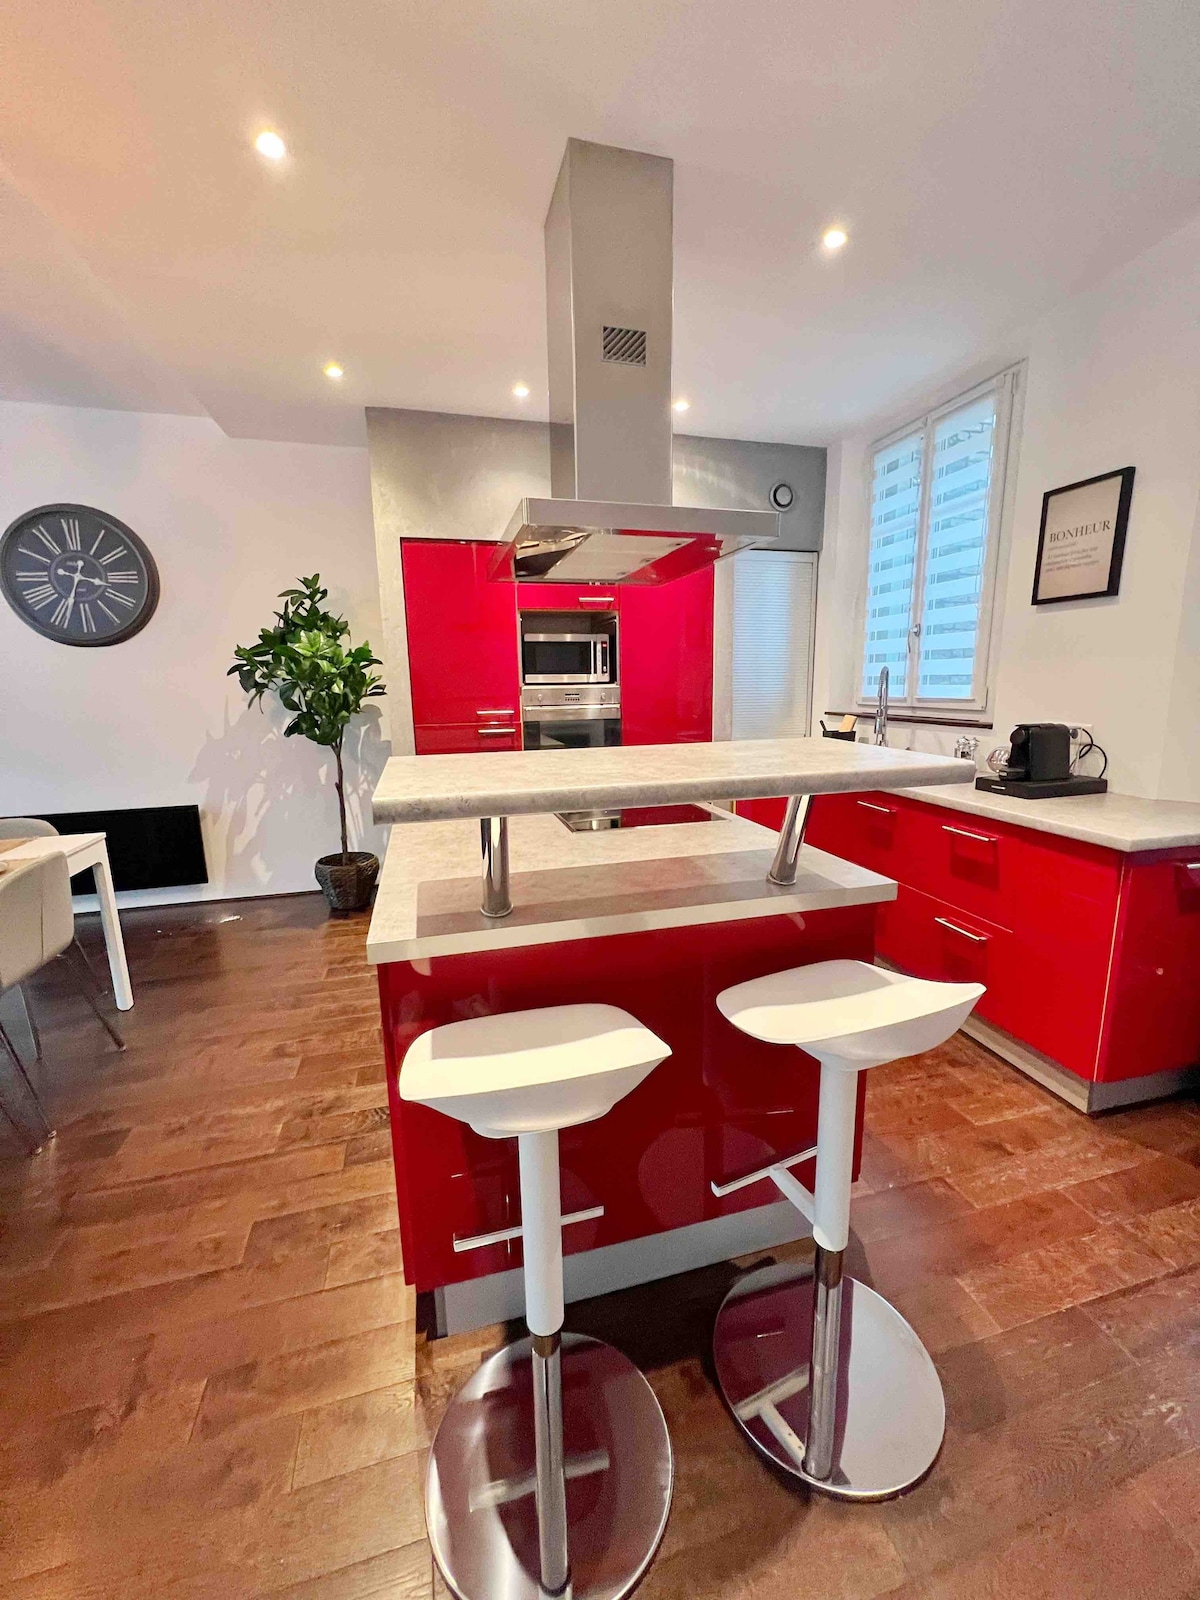 Very nice apartment in the heart of Reims